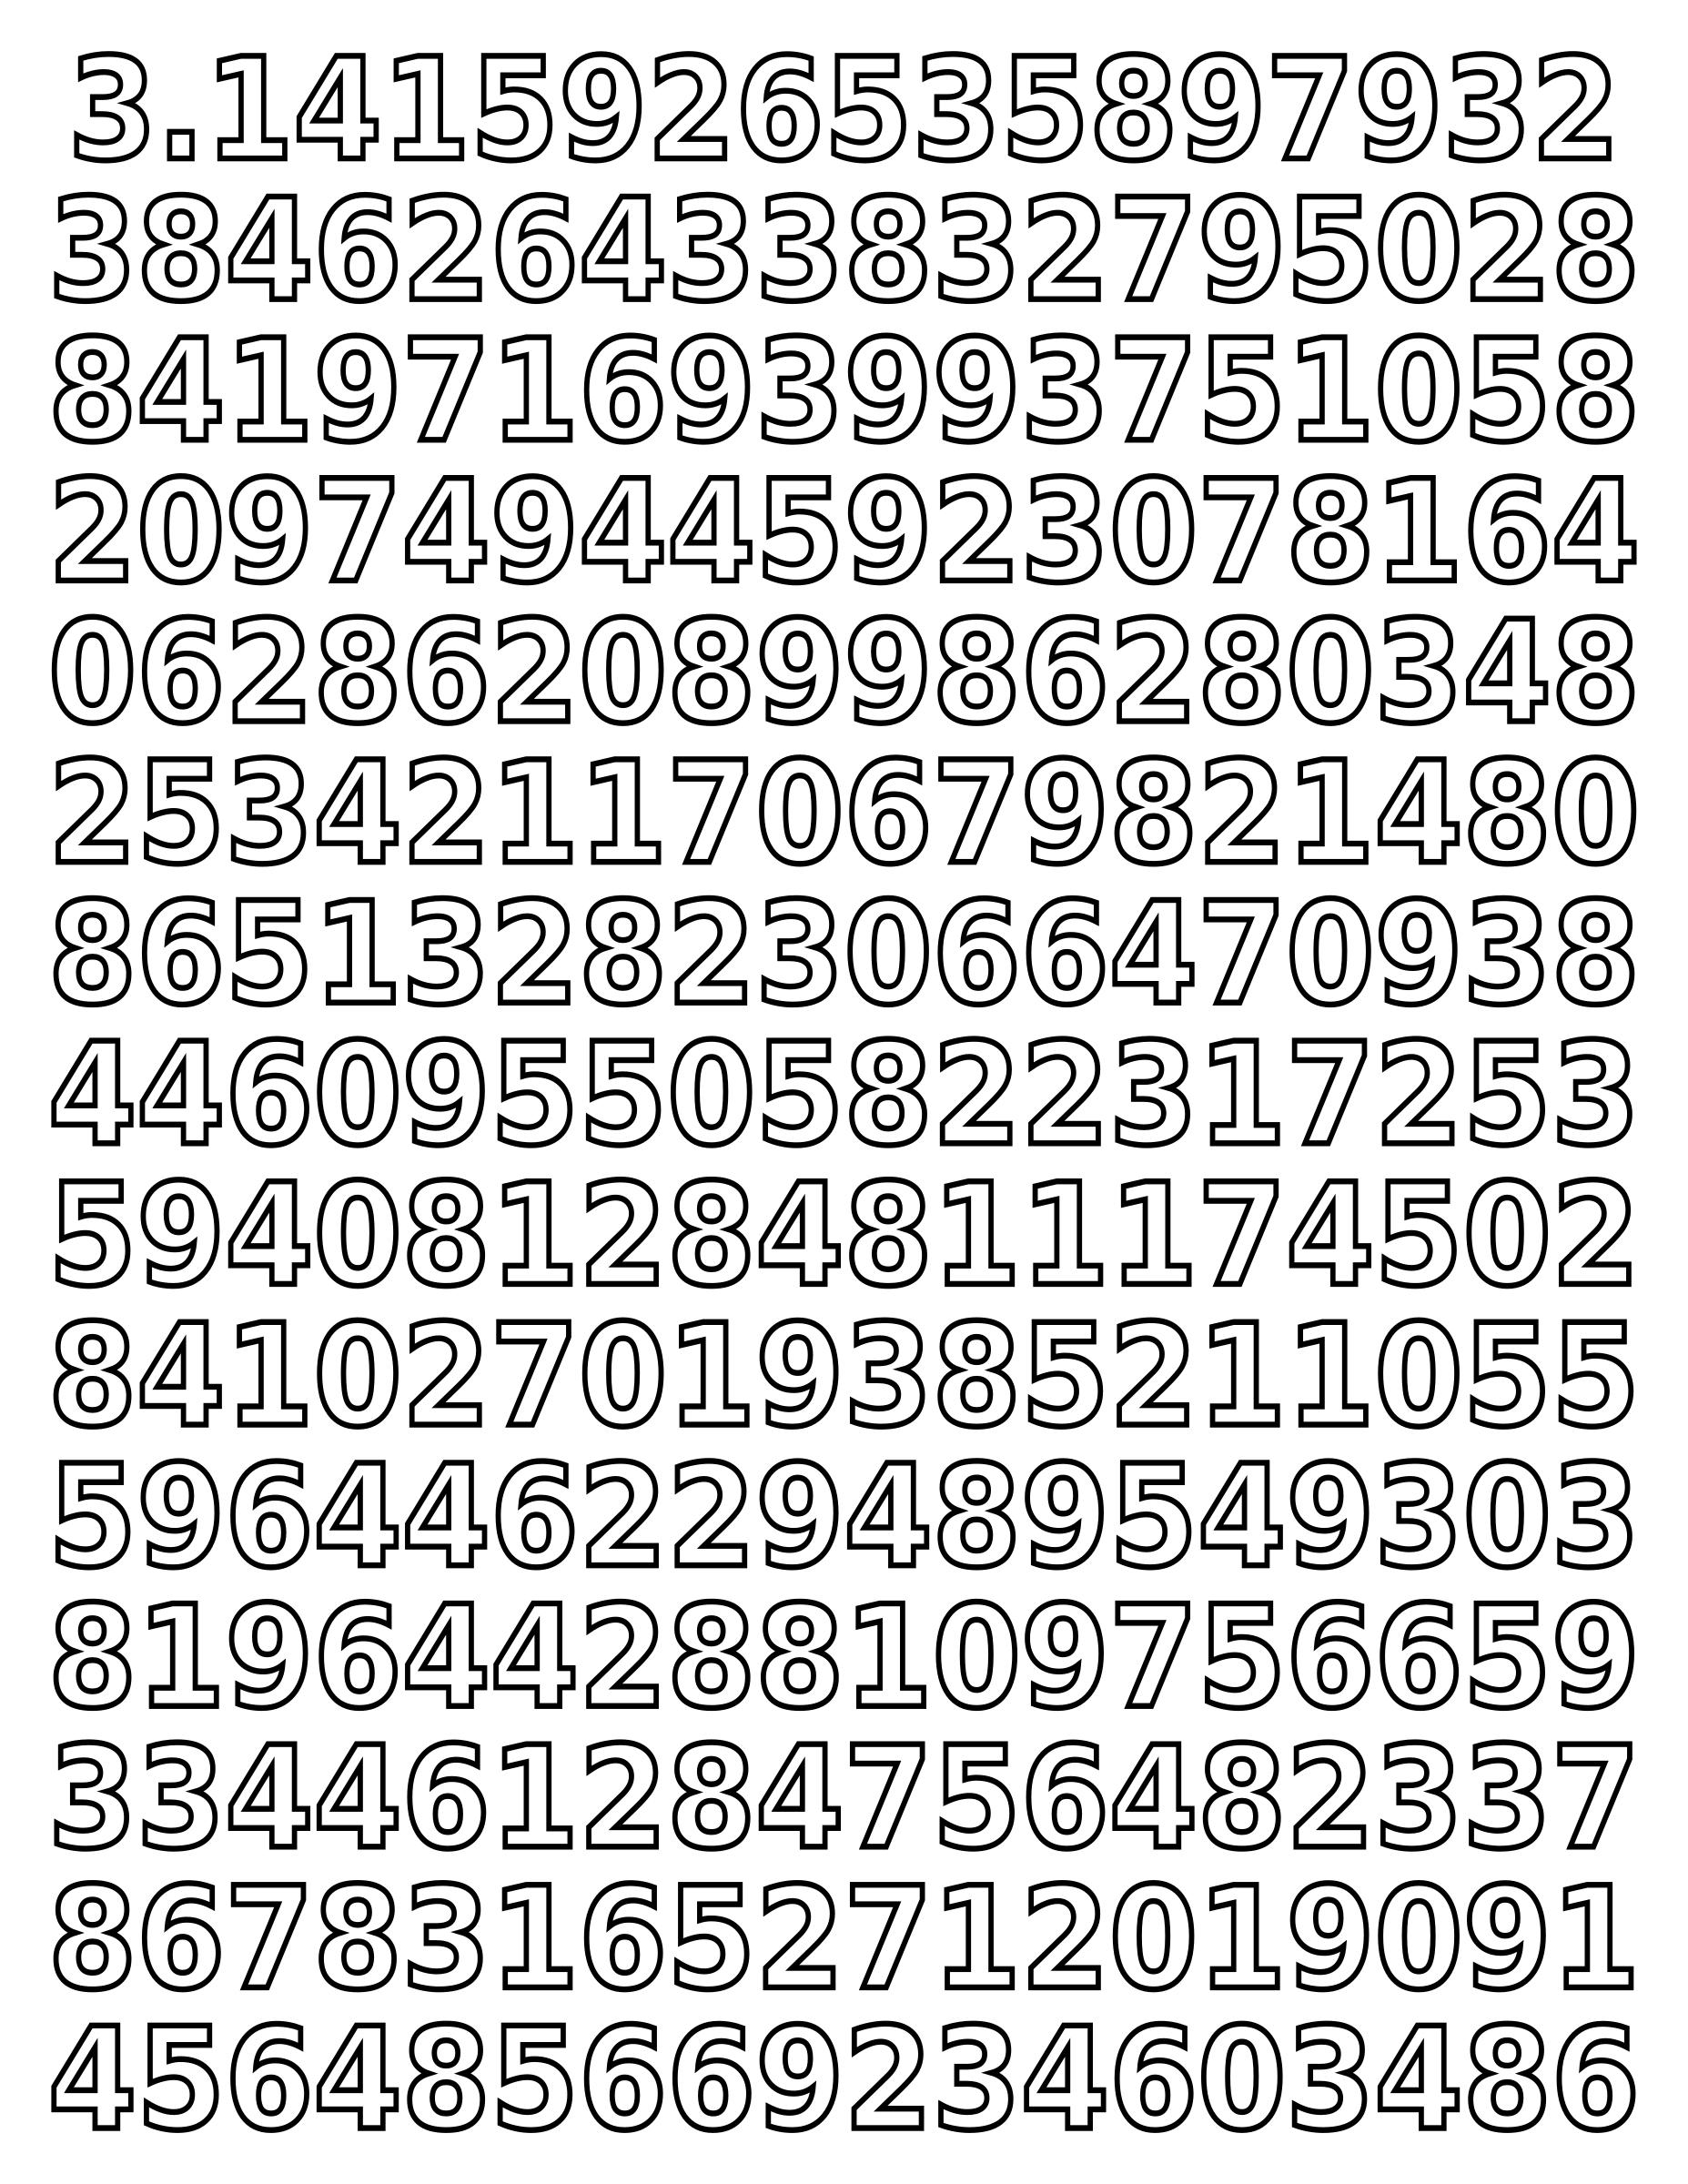 Coloring page - pi day digits of pi small png